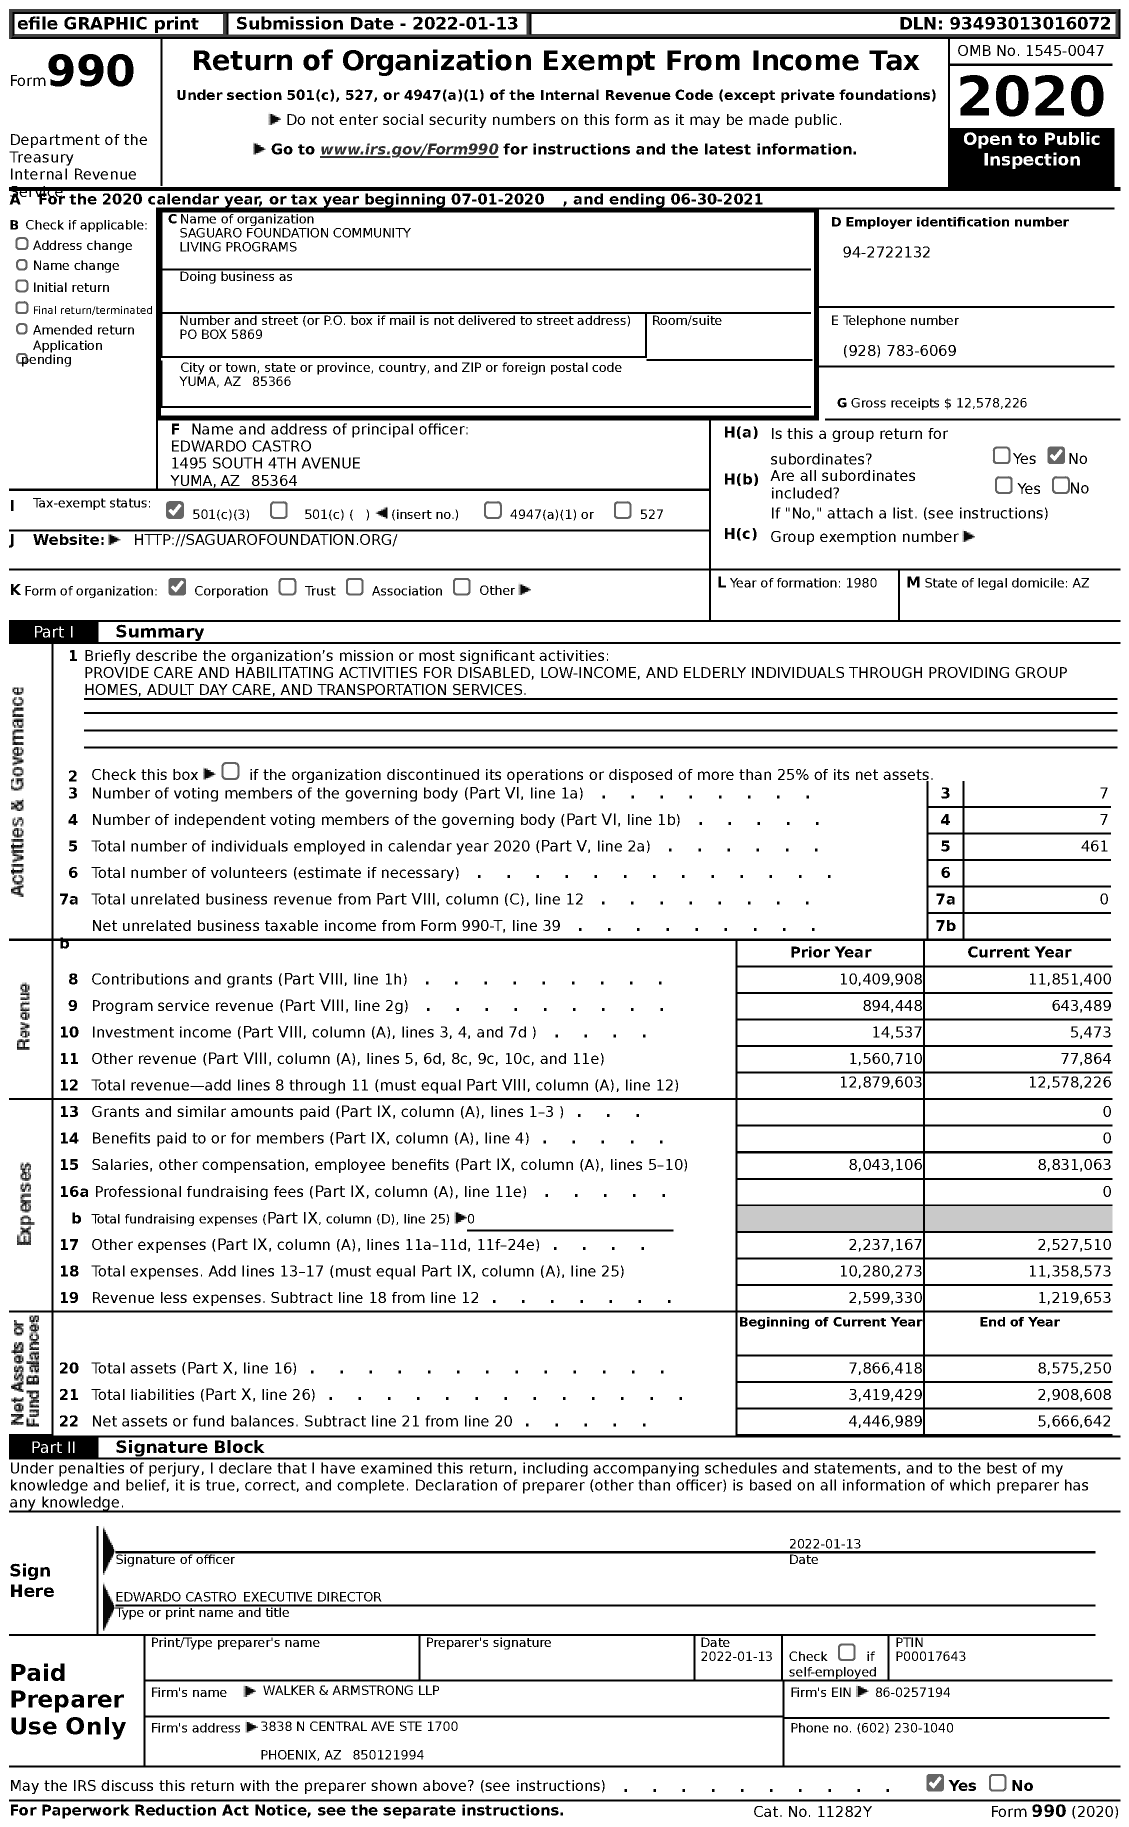 Image of first page of 2020 Form 990 for Saguaro Foundation Community Living Programs